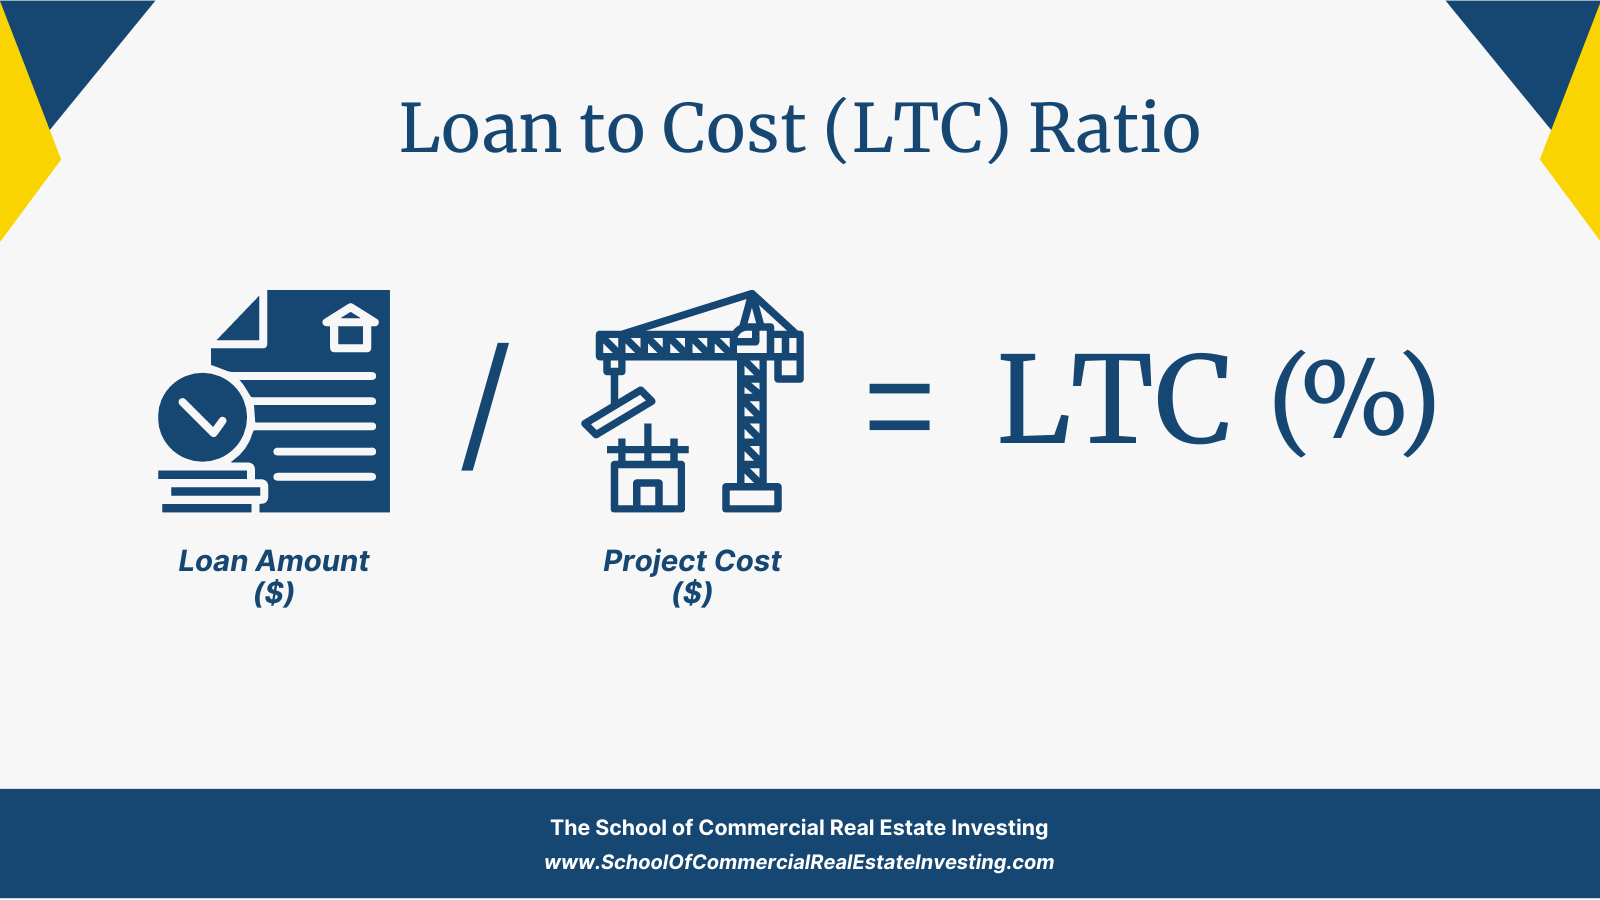 Calculate Loan to Cost (LTC) by dividing the loan amount by the project cost.